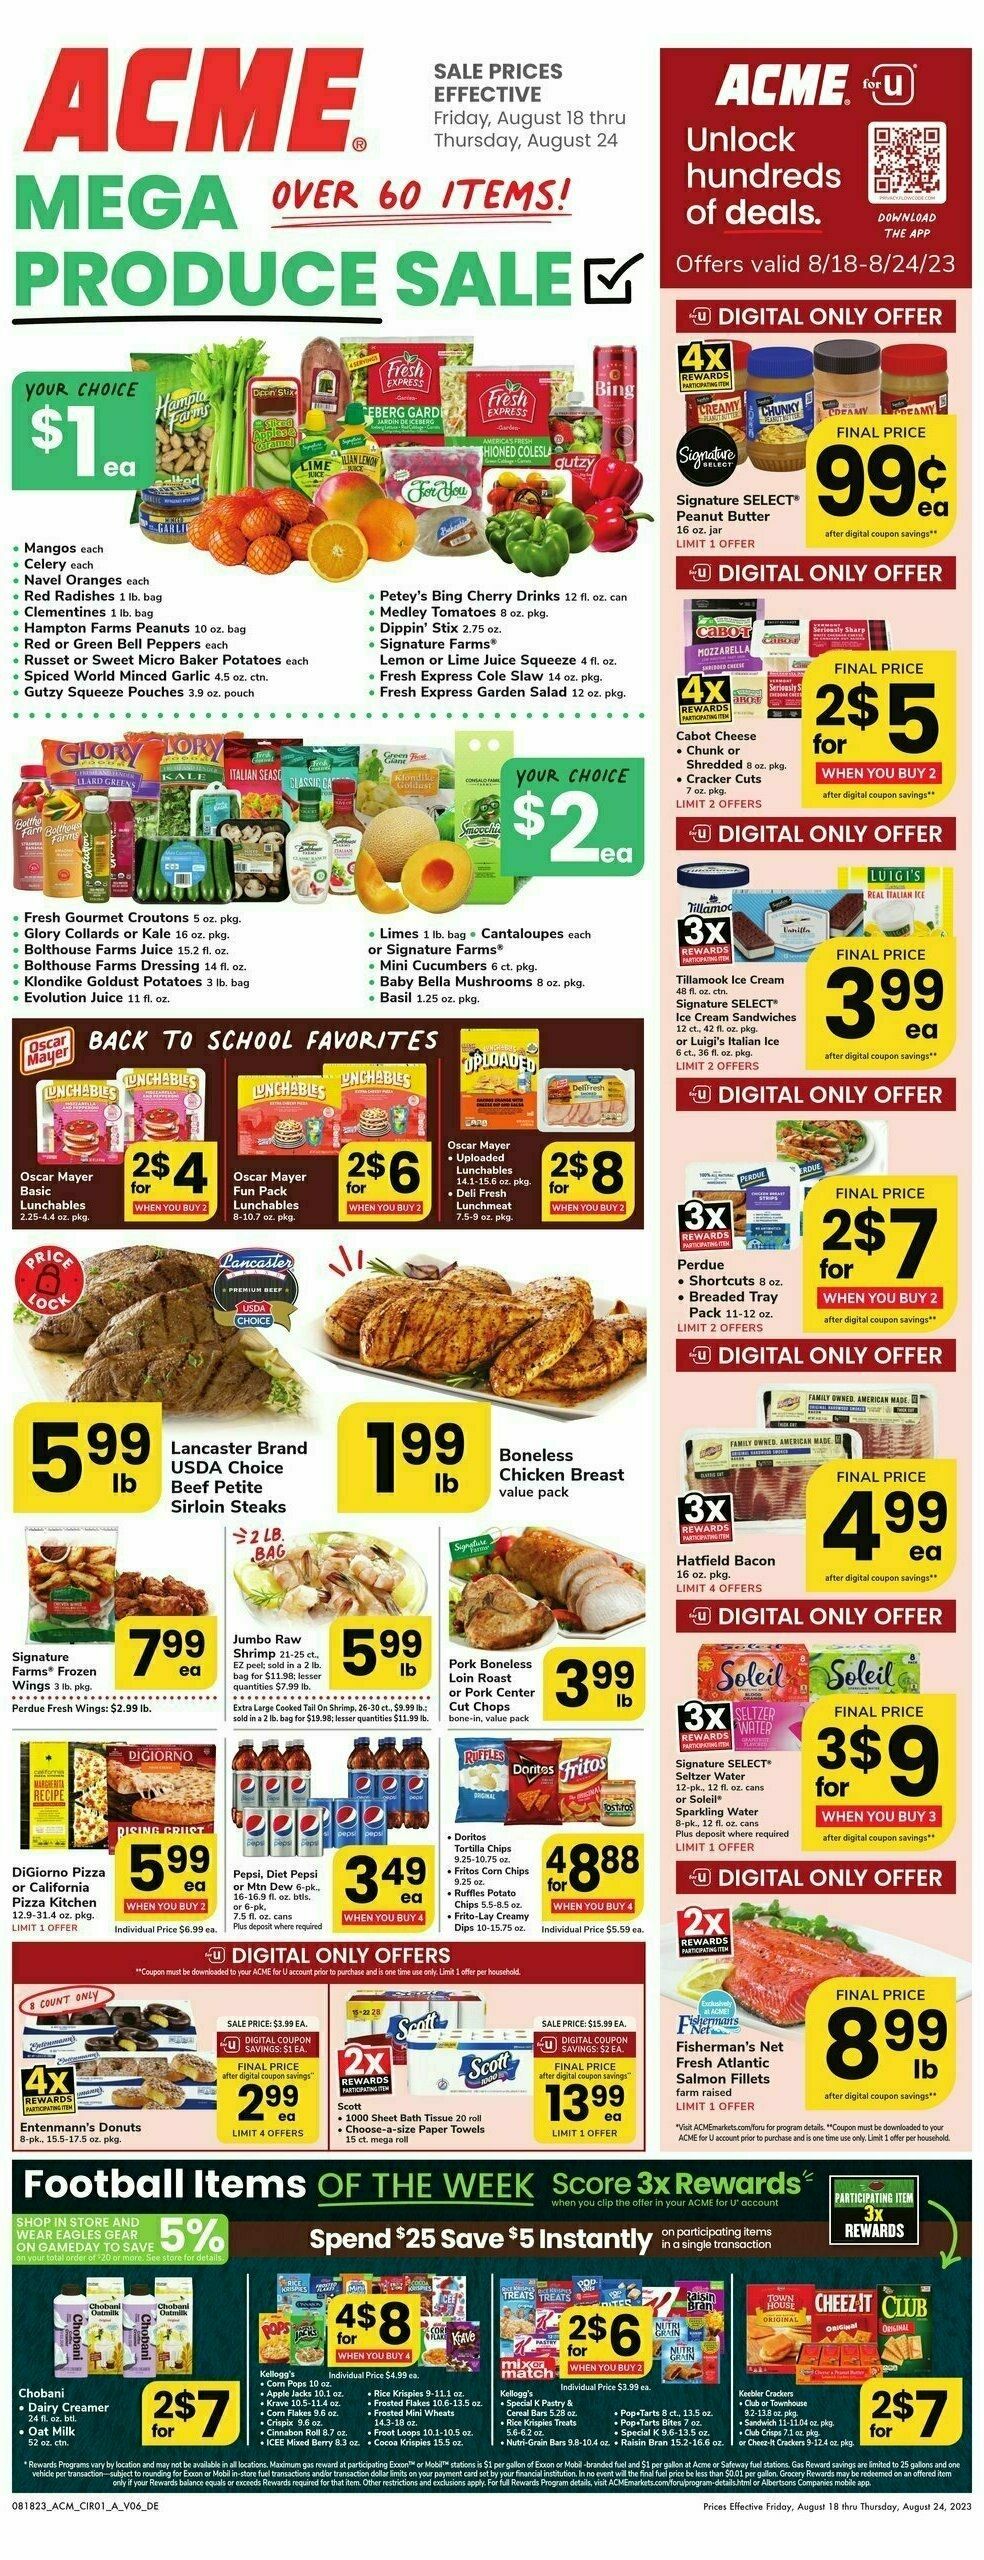 ACME Markets Weekly Ad from August 18